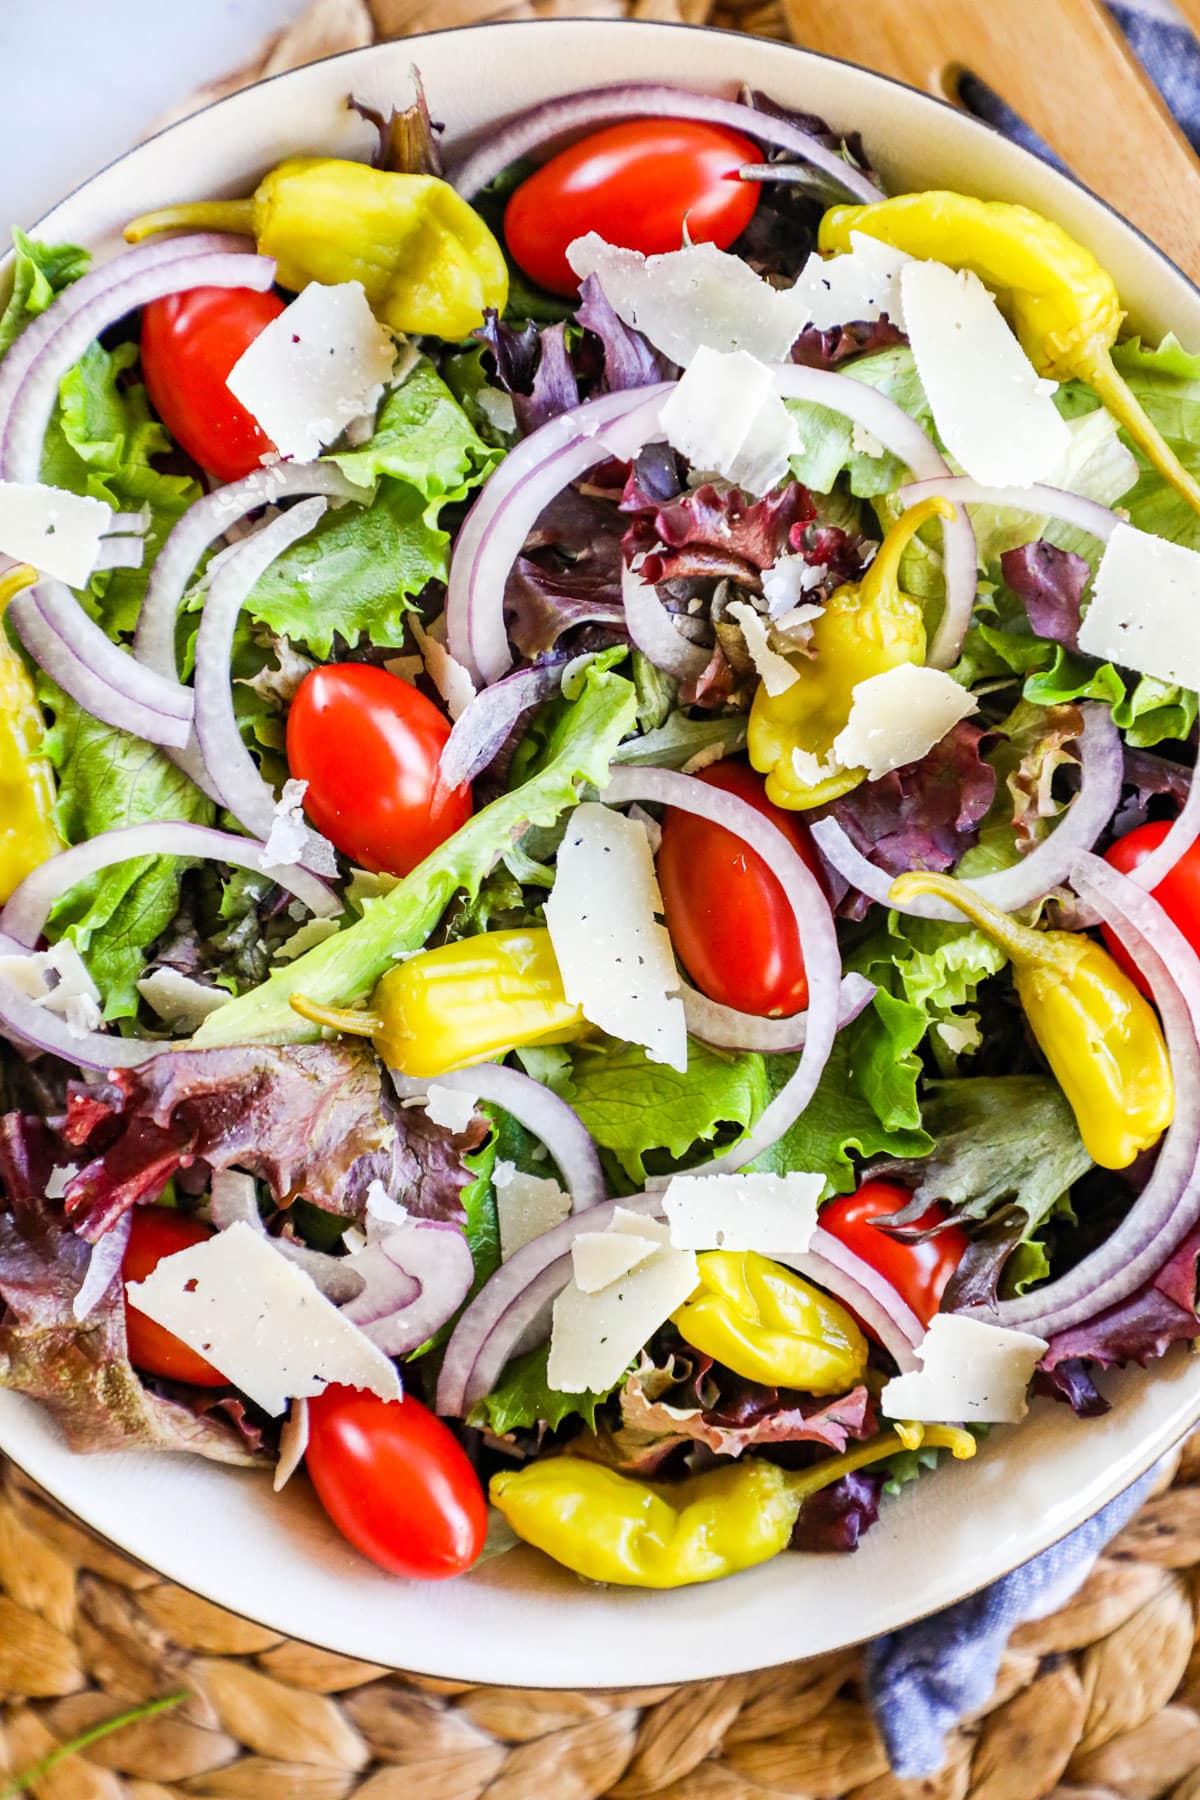 House salad to with tomatoes, red onion, pepperoncini, and parmesan